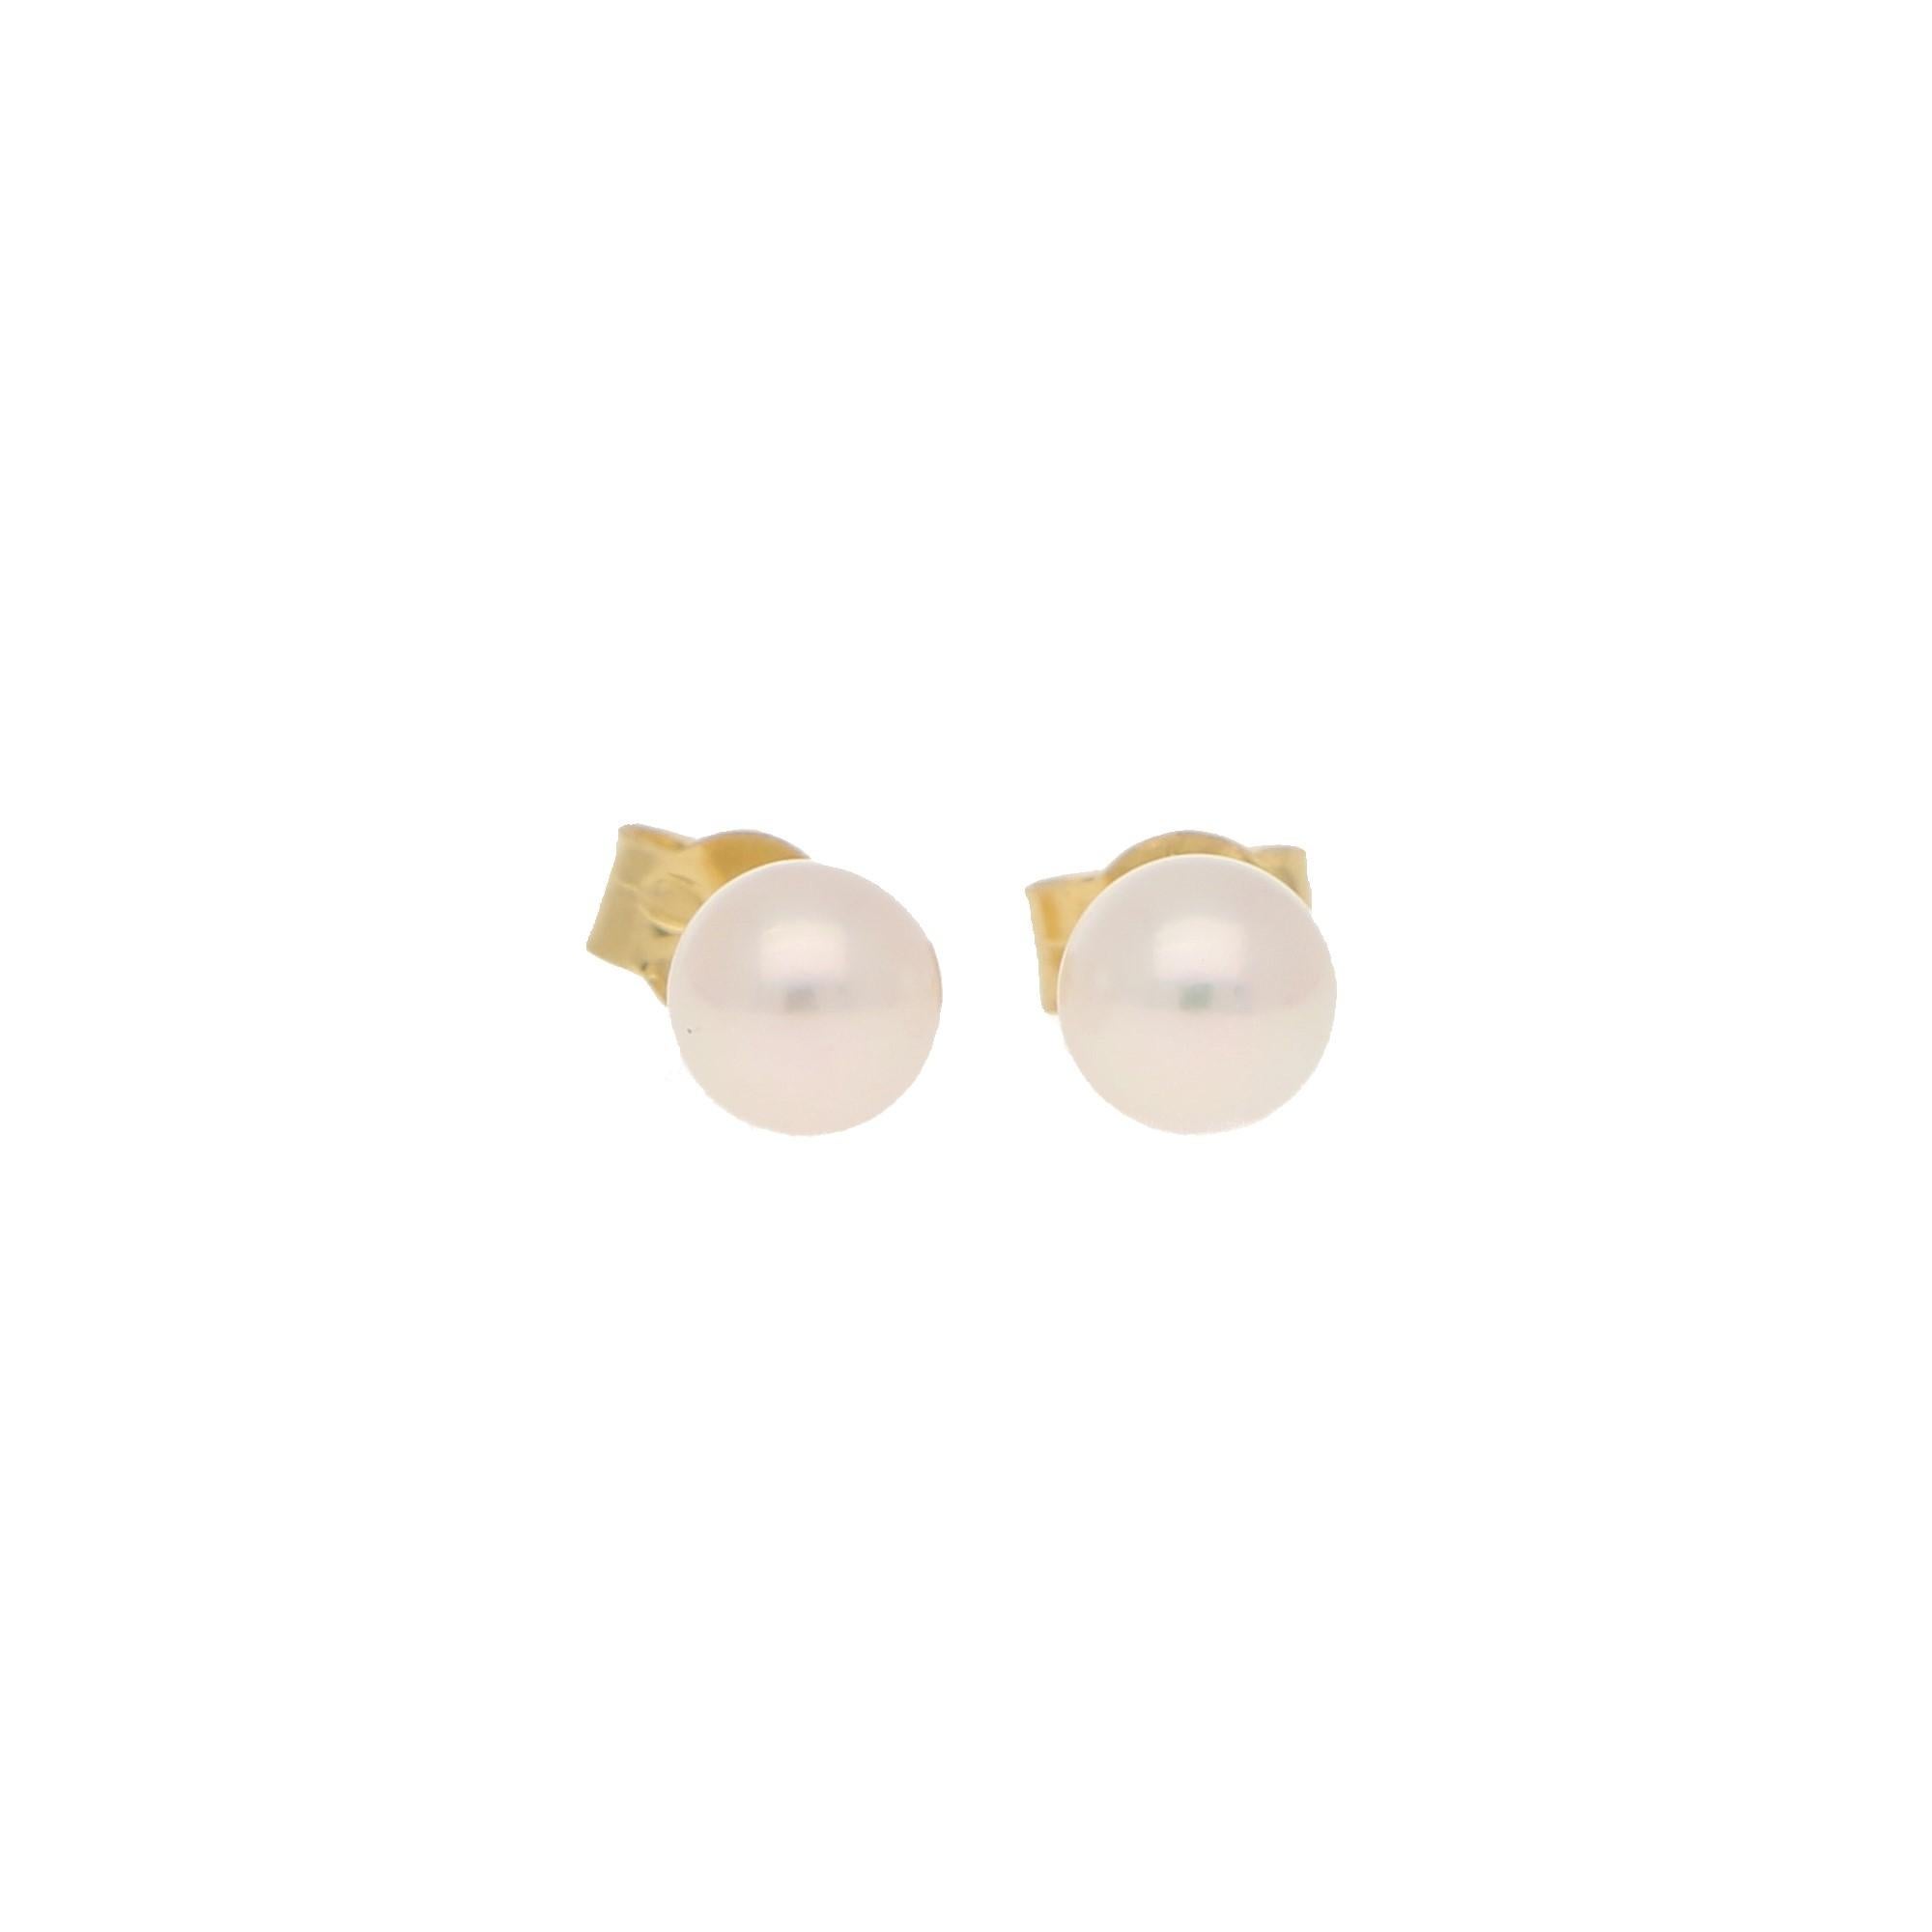 Fabulous pair of 5-5.5 millimetre pearl stud earrings. Beautifully matched in size, colour and lustre these pearls are selected from the finest Japanese Akoya pearls (traditional salt water cultured pearls).

These earrings have a post and butterfly